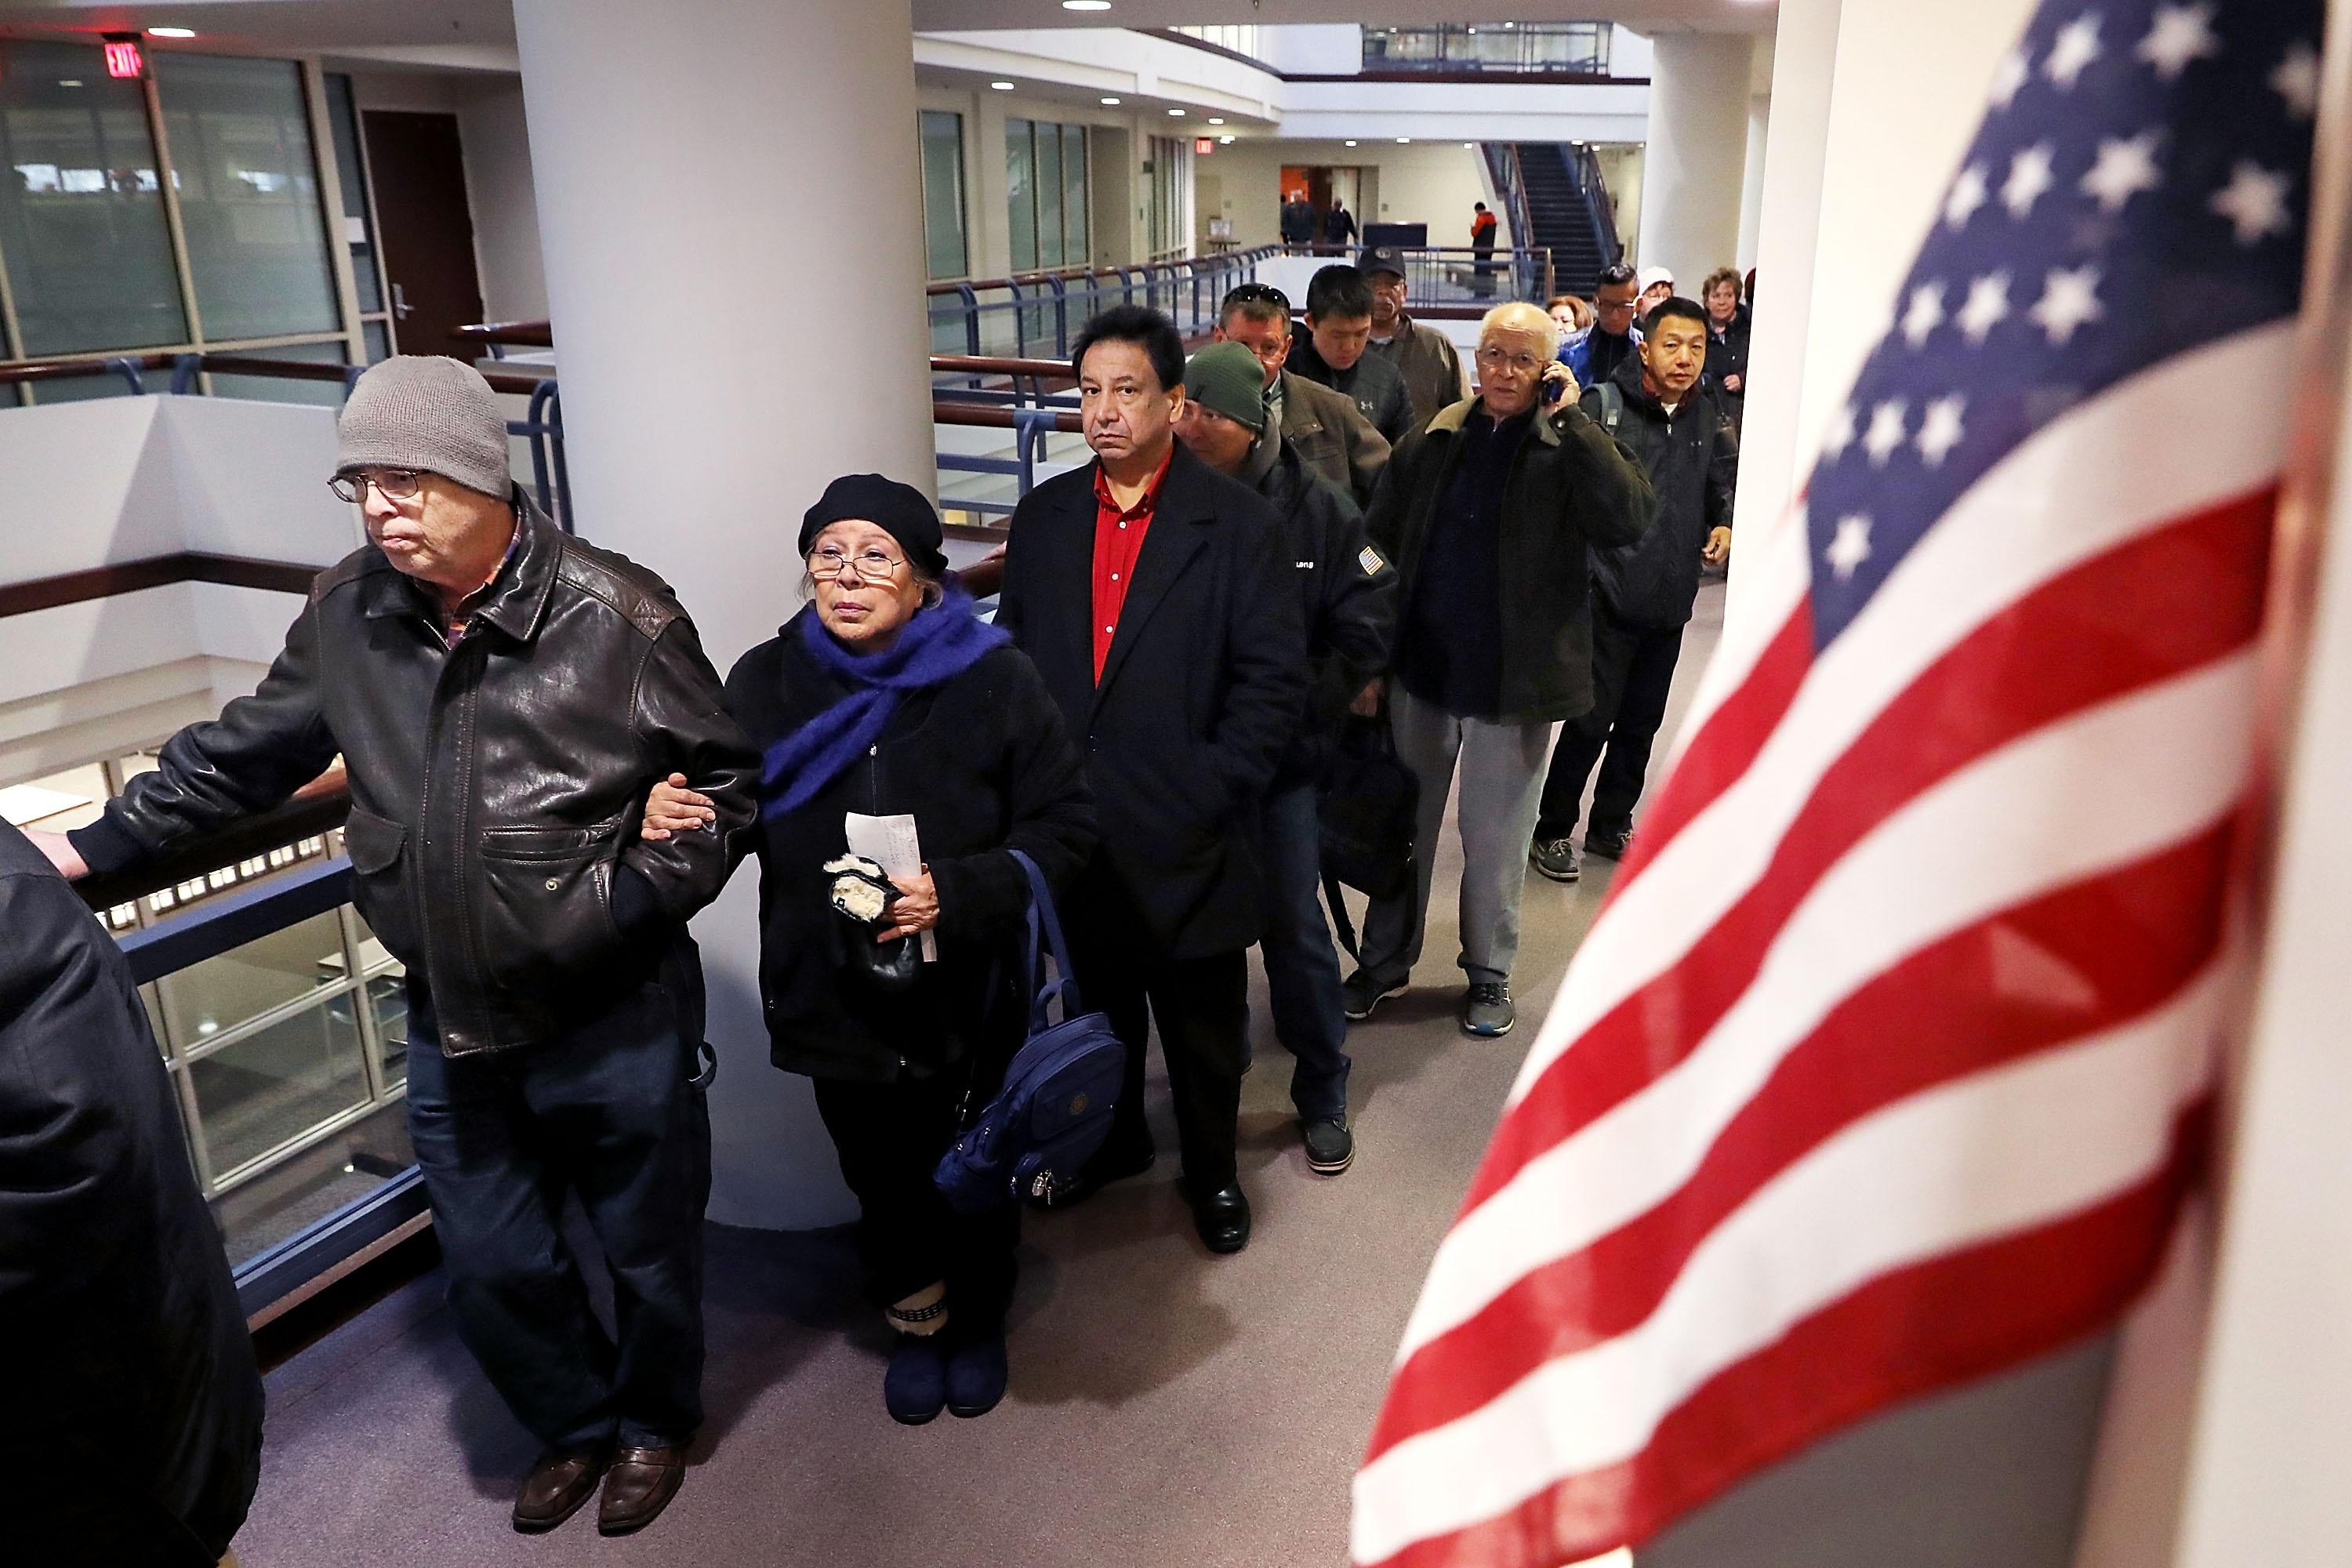 FAIRFAX, VA - DECEMBER 28:  Residents wait in line to pay taxes at the Fairfax County Government Center December 28, 2017 in Fairfax, Virginia. Many people are pre-paying their 2018 property taxes before the end of the calendar year in an attempt to blunt the effects of the new Republican tax law's $10,000 cap on deductions for state and local taxes that will disproportionately affect higher-tax, Democratic-leaning states.   (Photo by Chip Somodevilla/Getty Images)